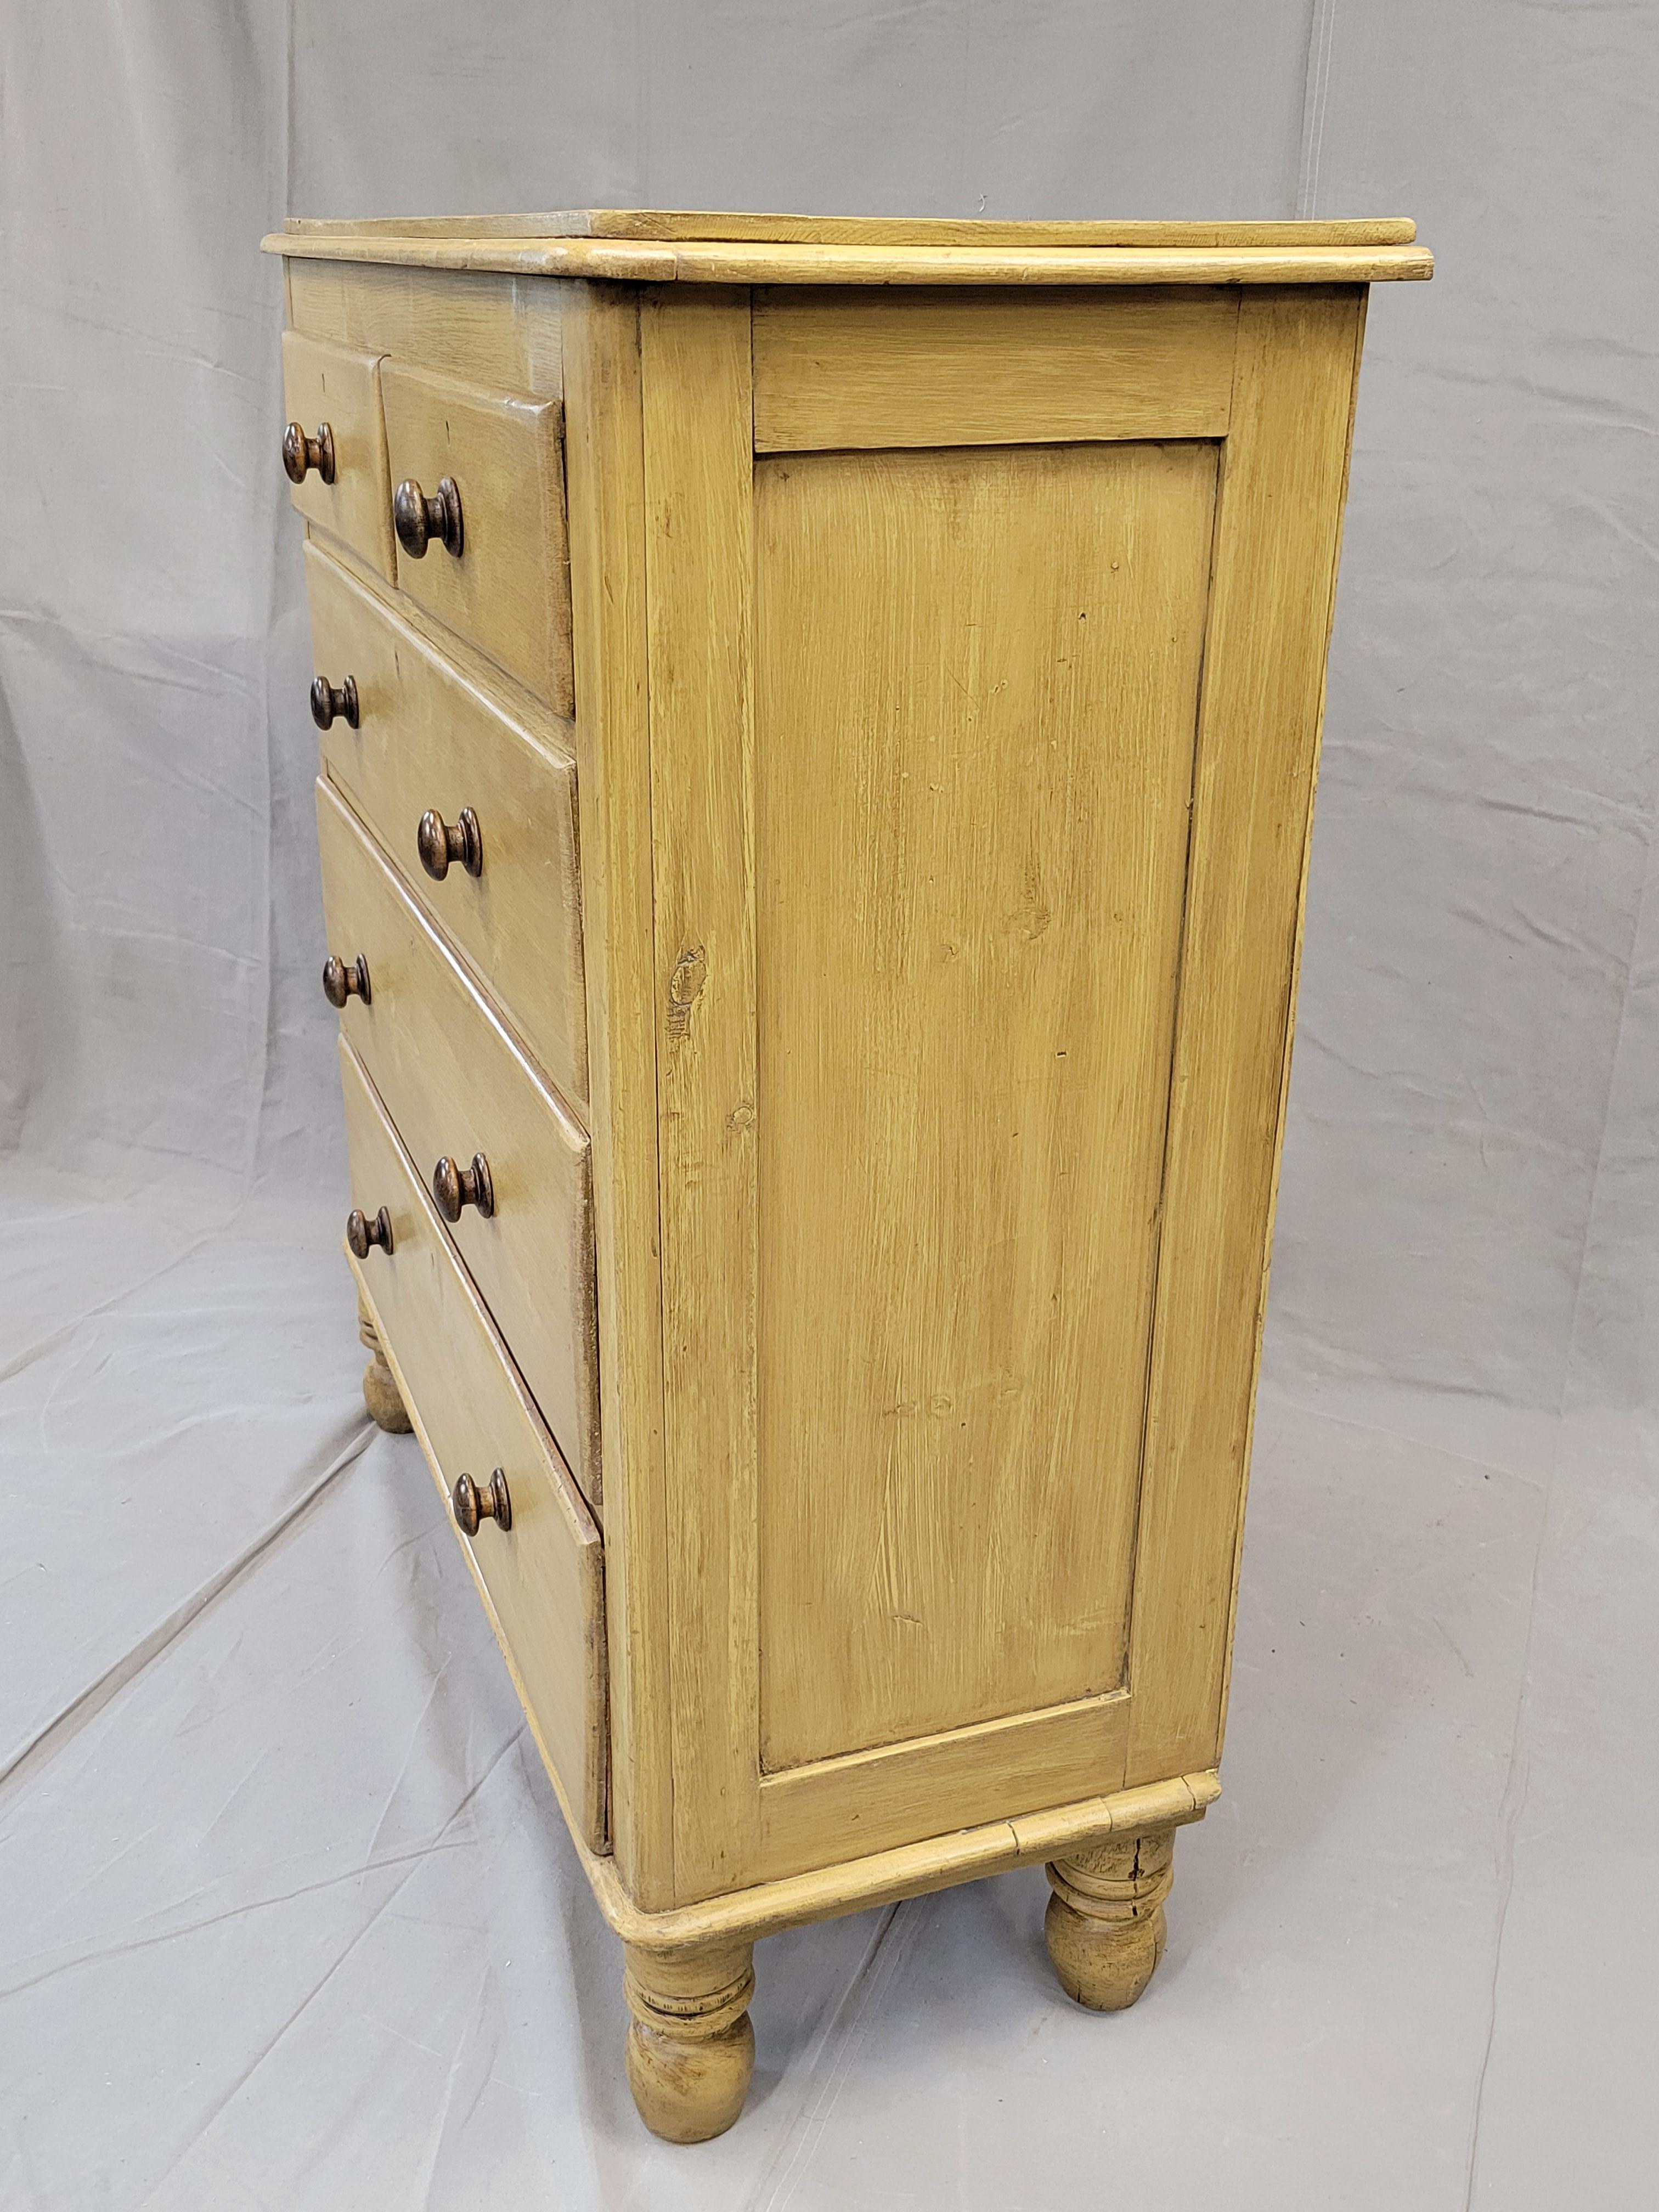 Antique English Edwardian Circa 1900 Painted Pine Dresser Chest of Drawers For Sale 4